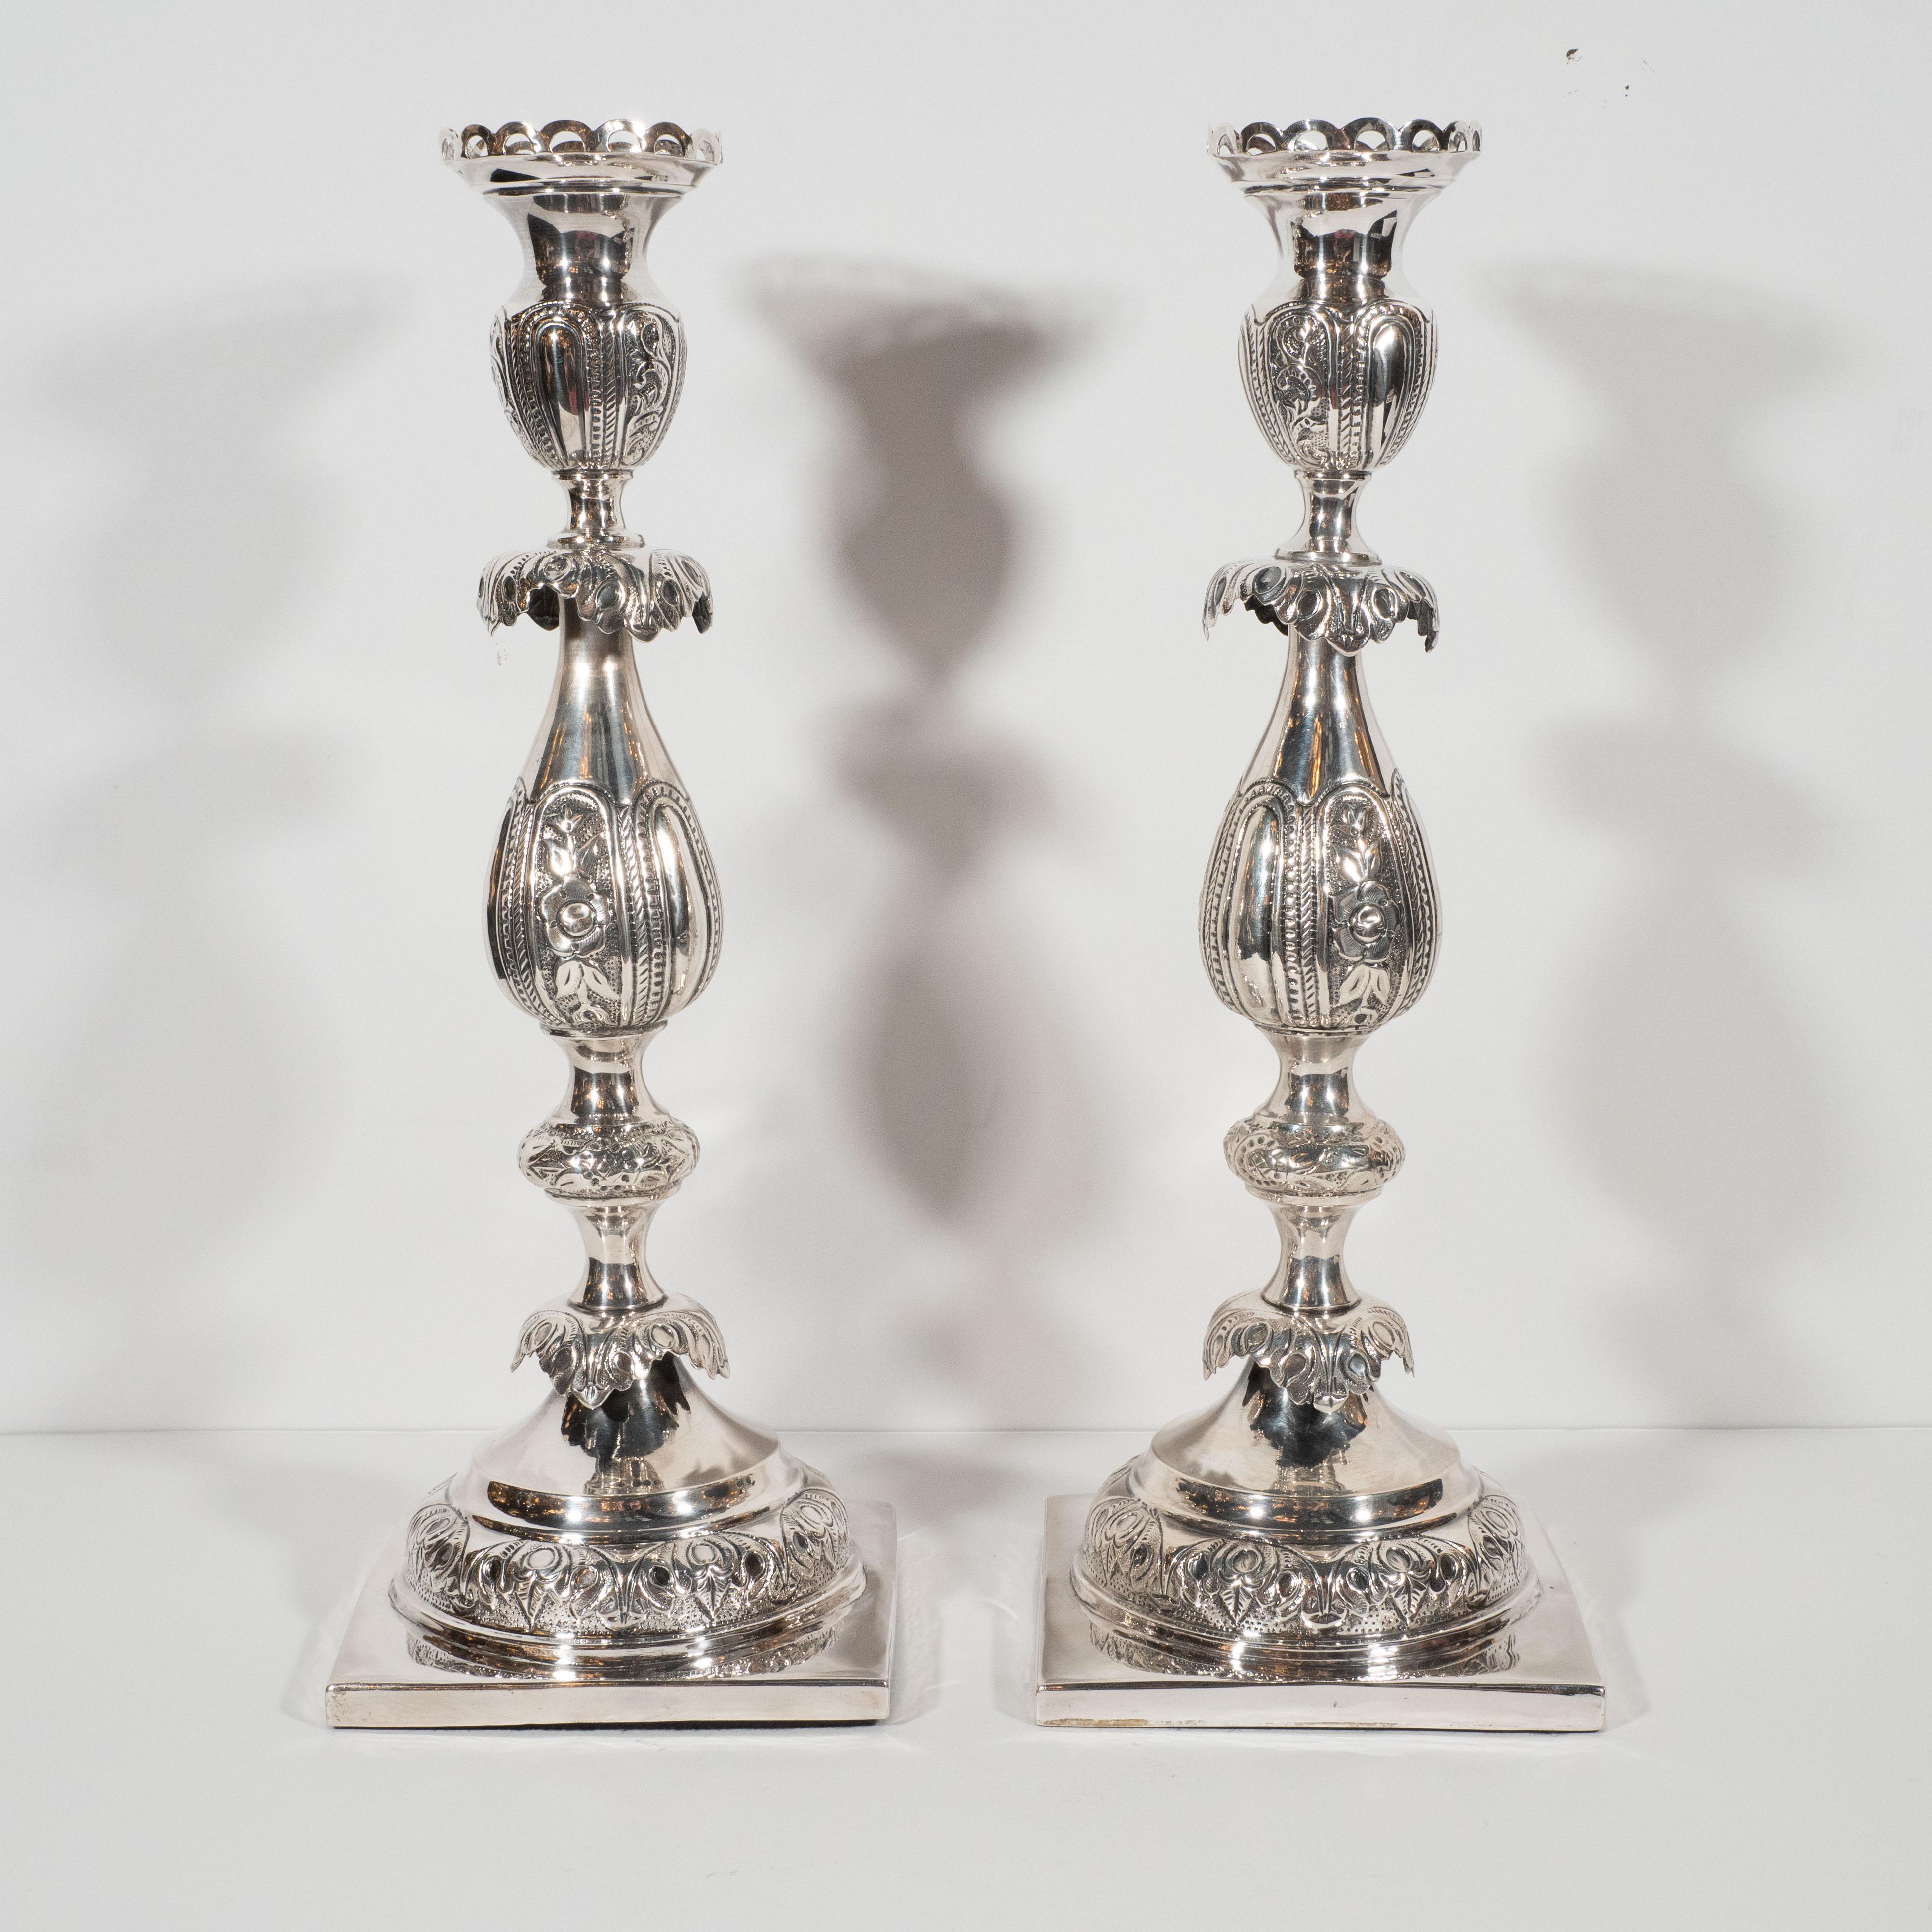 This elegant pair of neoclassical sterling silver Sabbath candlesticks were realized in Poland at the end of the 19th century. Rising from a square base, each candlestick offers an undulating balustrade form with a wealth of hand inscribed repoussé